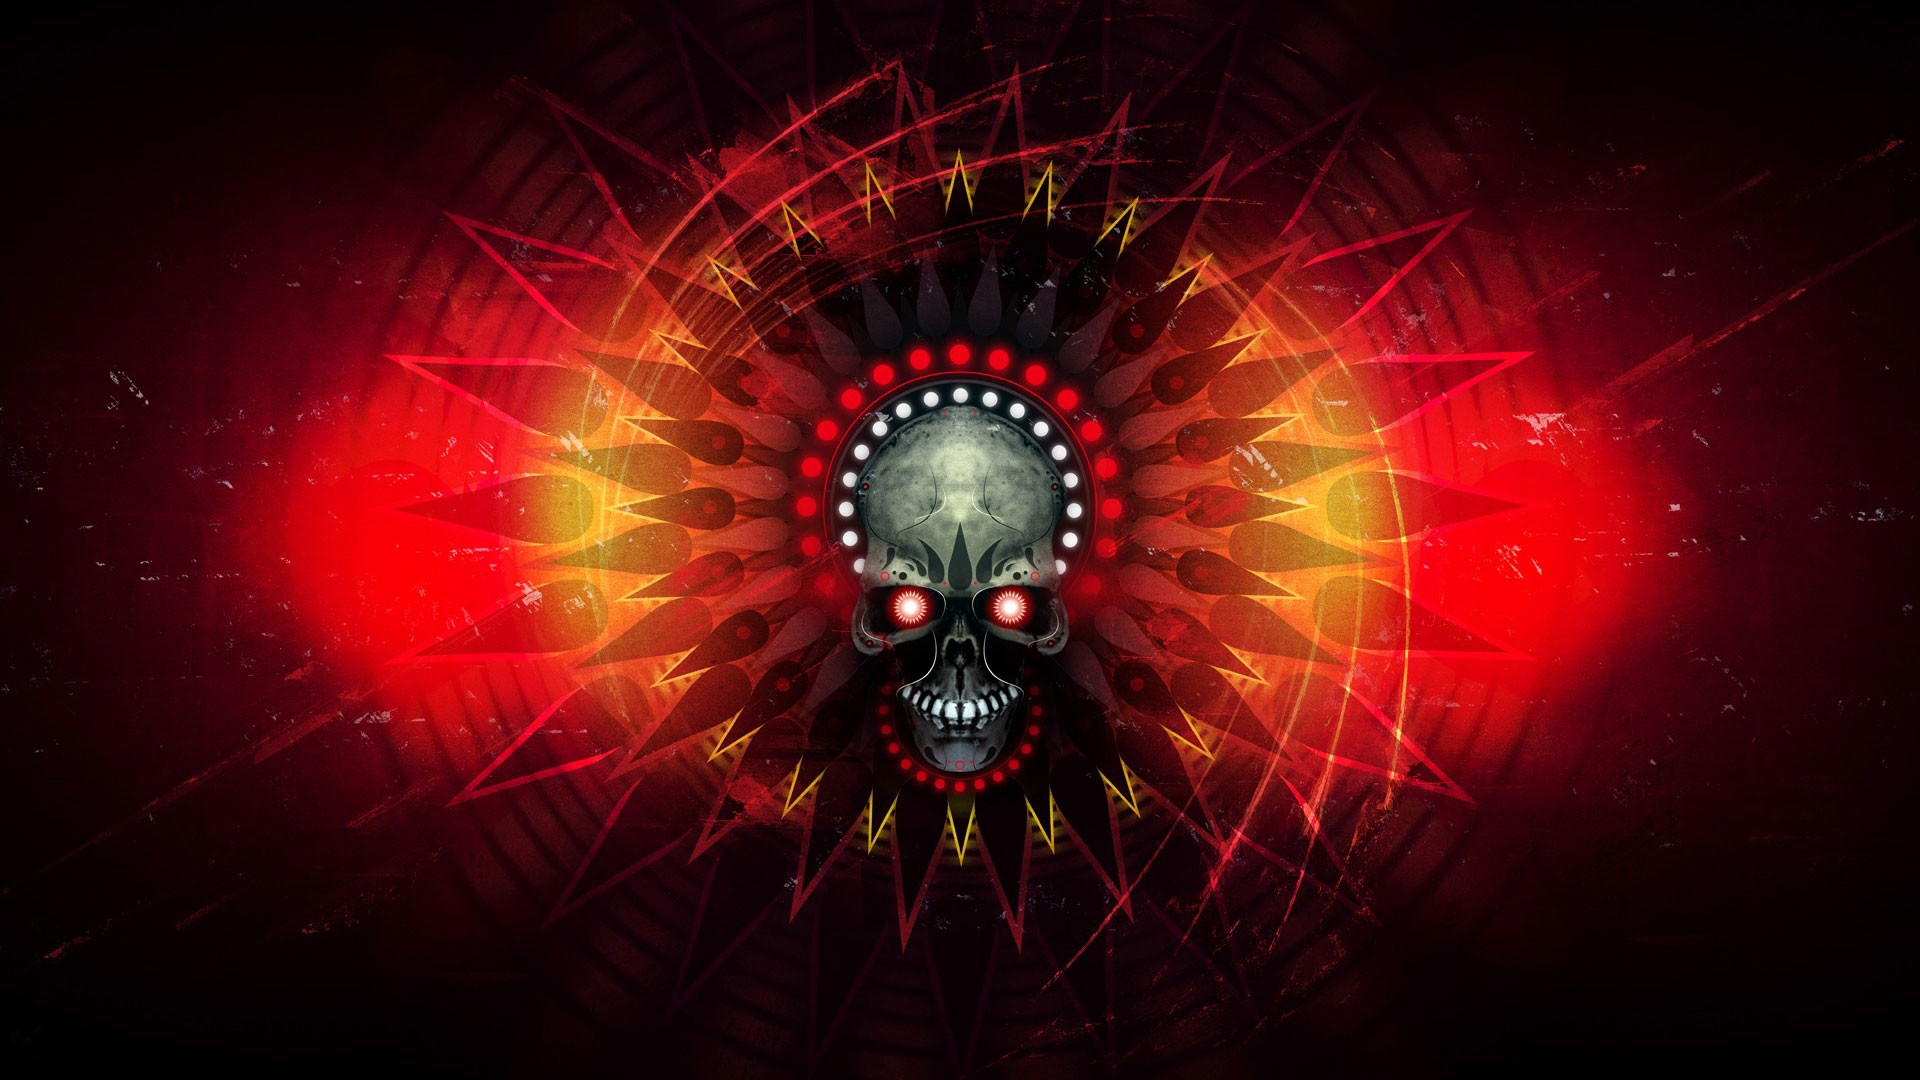 1920x1080 hd pics photos attractive skull danger red eye neon red abstract hd quality  desktop background wallpaper